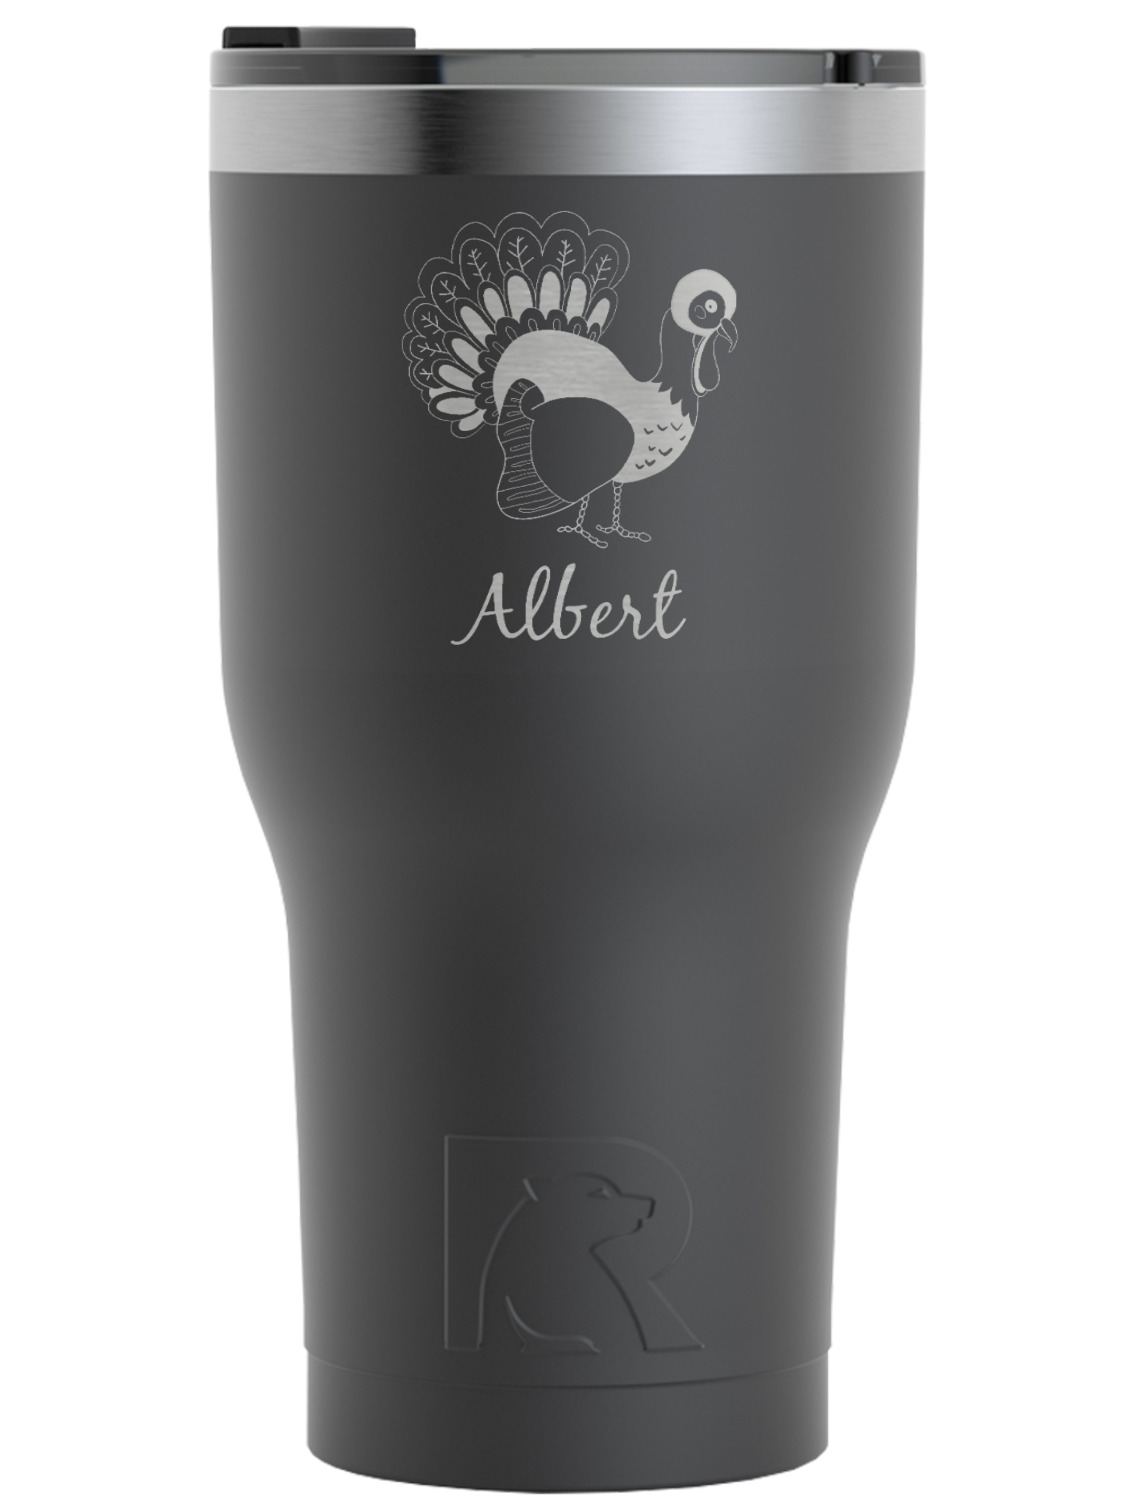 https://www.youcustomizeit.com/common/MAKE/513928/Old-Fashioned-Thanksgiving-Black-RTIC-Tumbler-Front.jpg?lm=1688681330